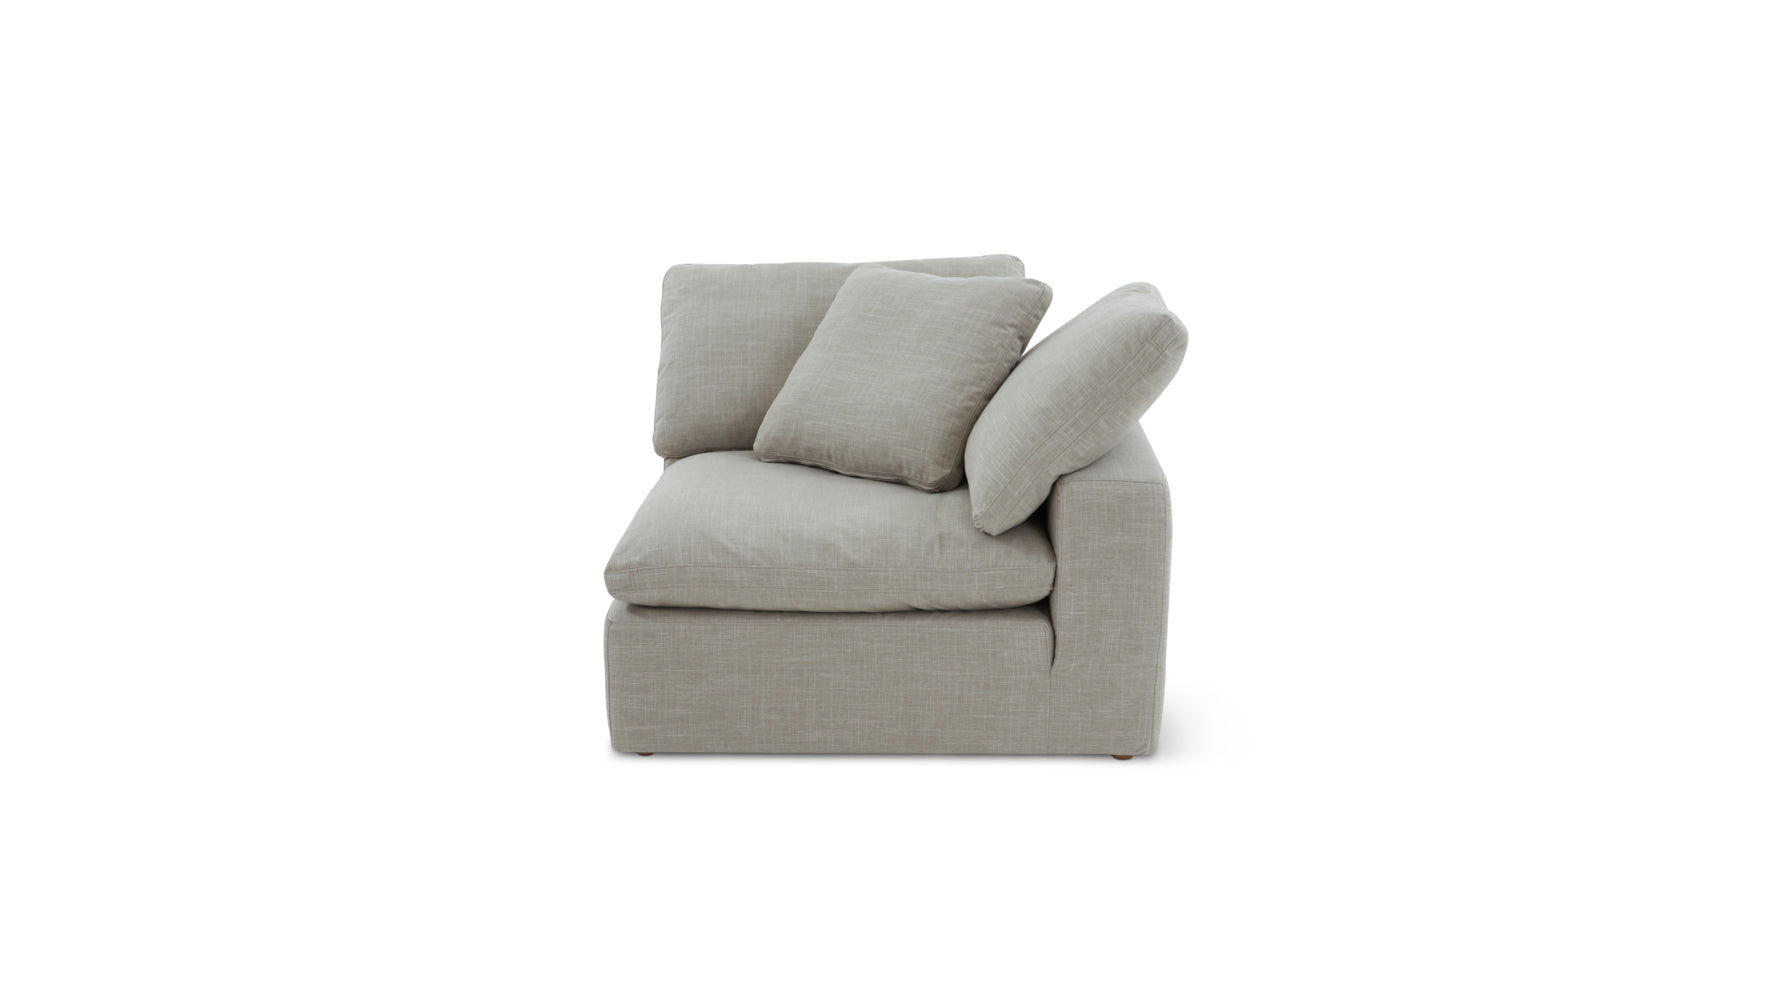 Slipcover - Movie Night™ Corner Chair, Large, Light Pebble (Left or Right) - Image 1